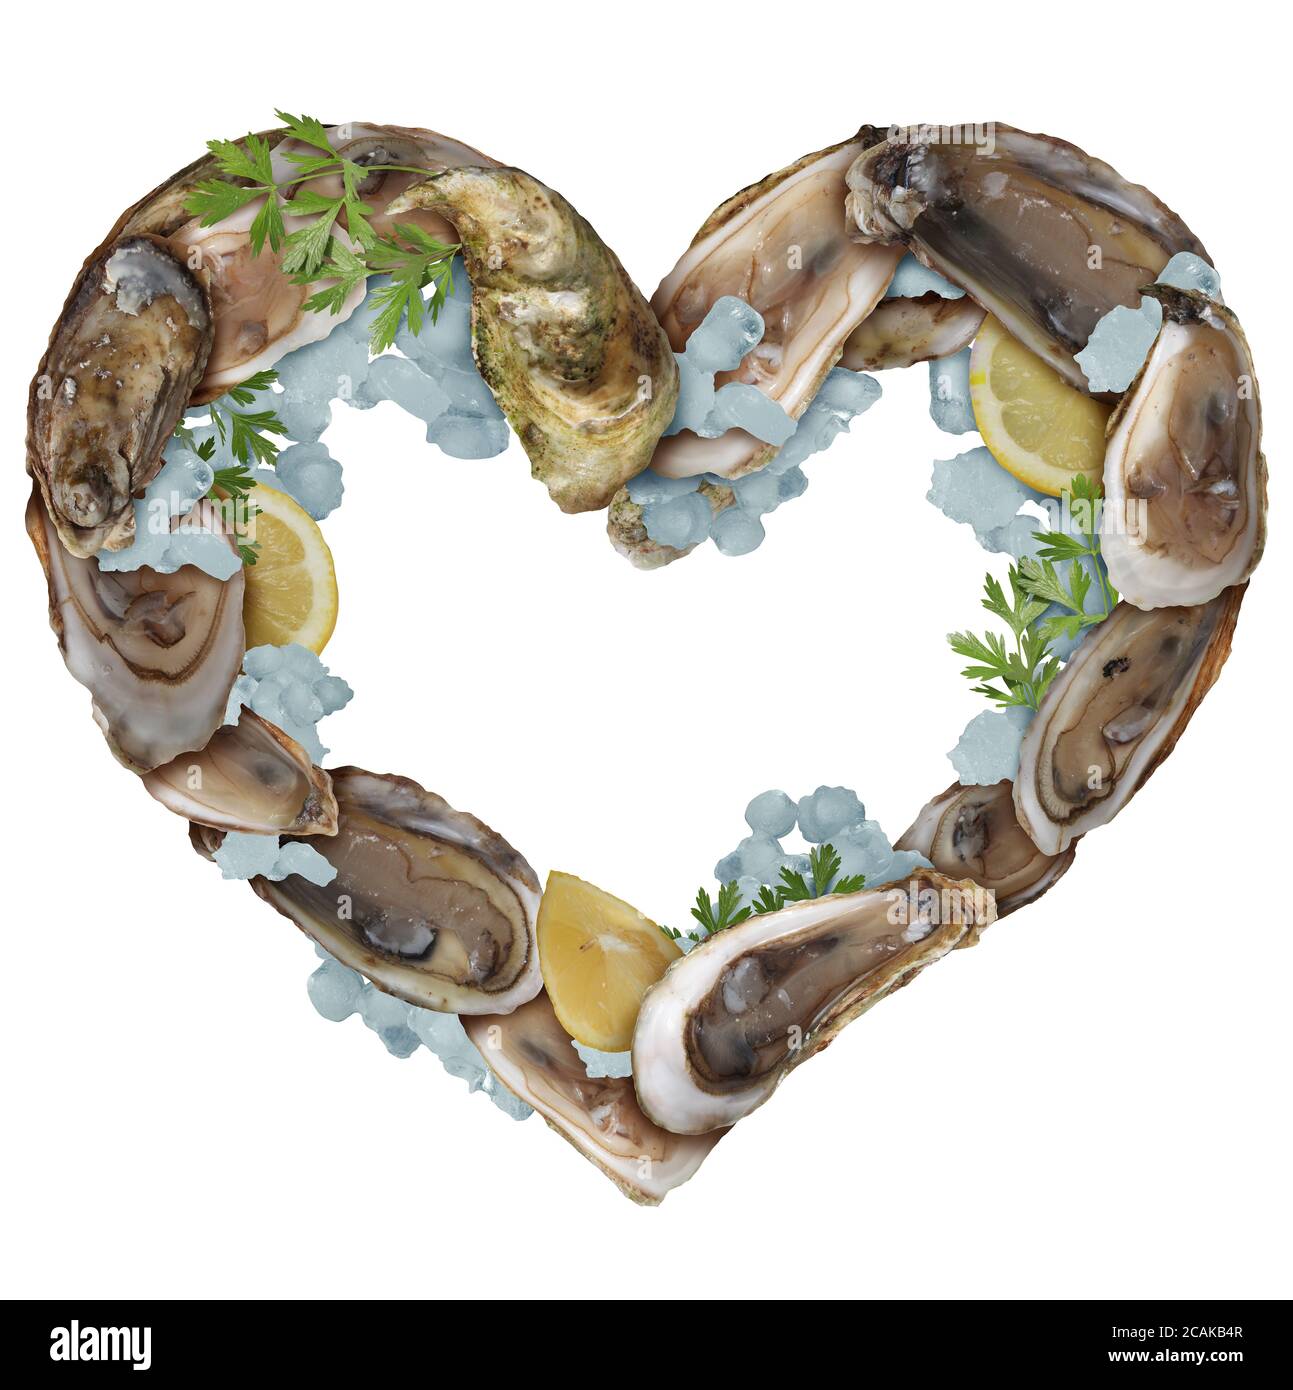 Oysters love as a group of oyster shells with lemon slices and ice as a gourmet food and aphrodisiac isolated on a white background. Stock Photo